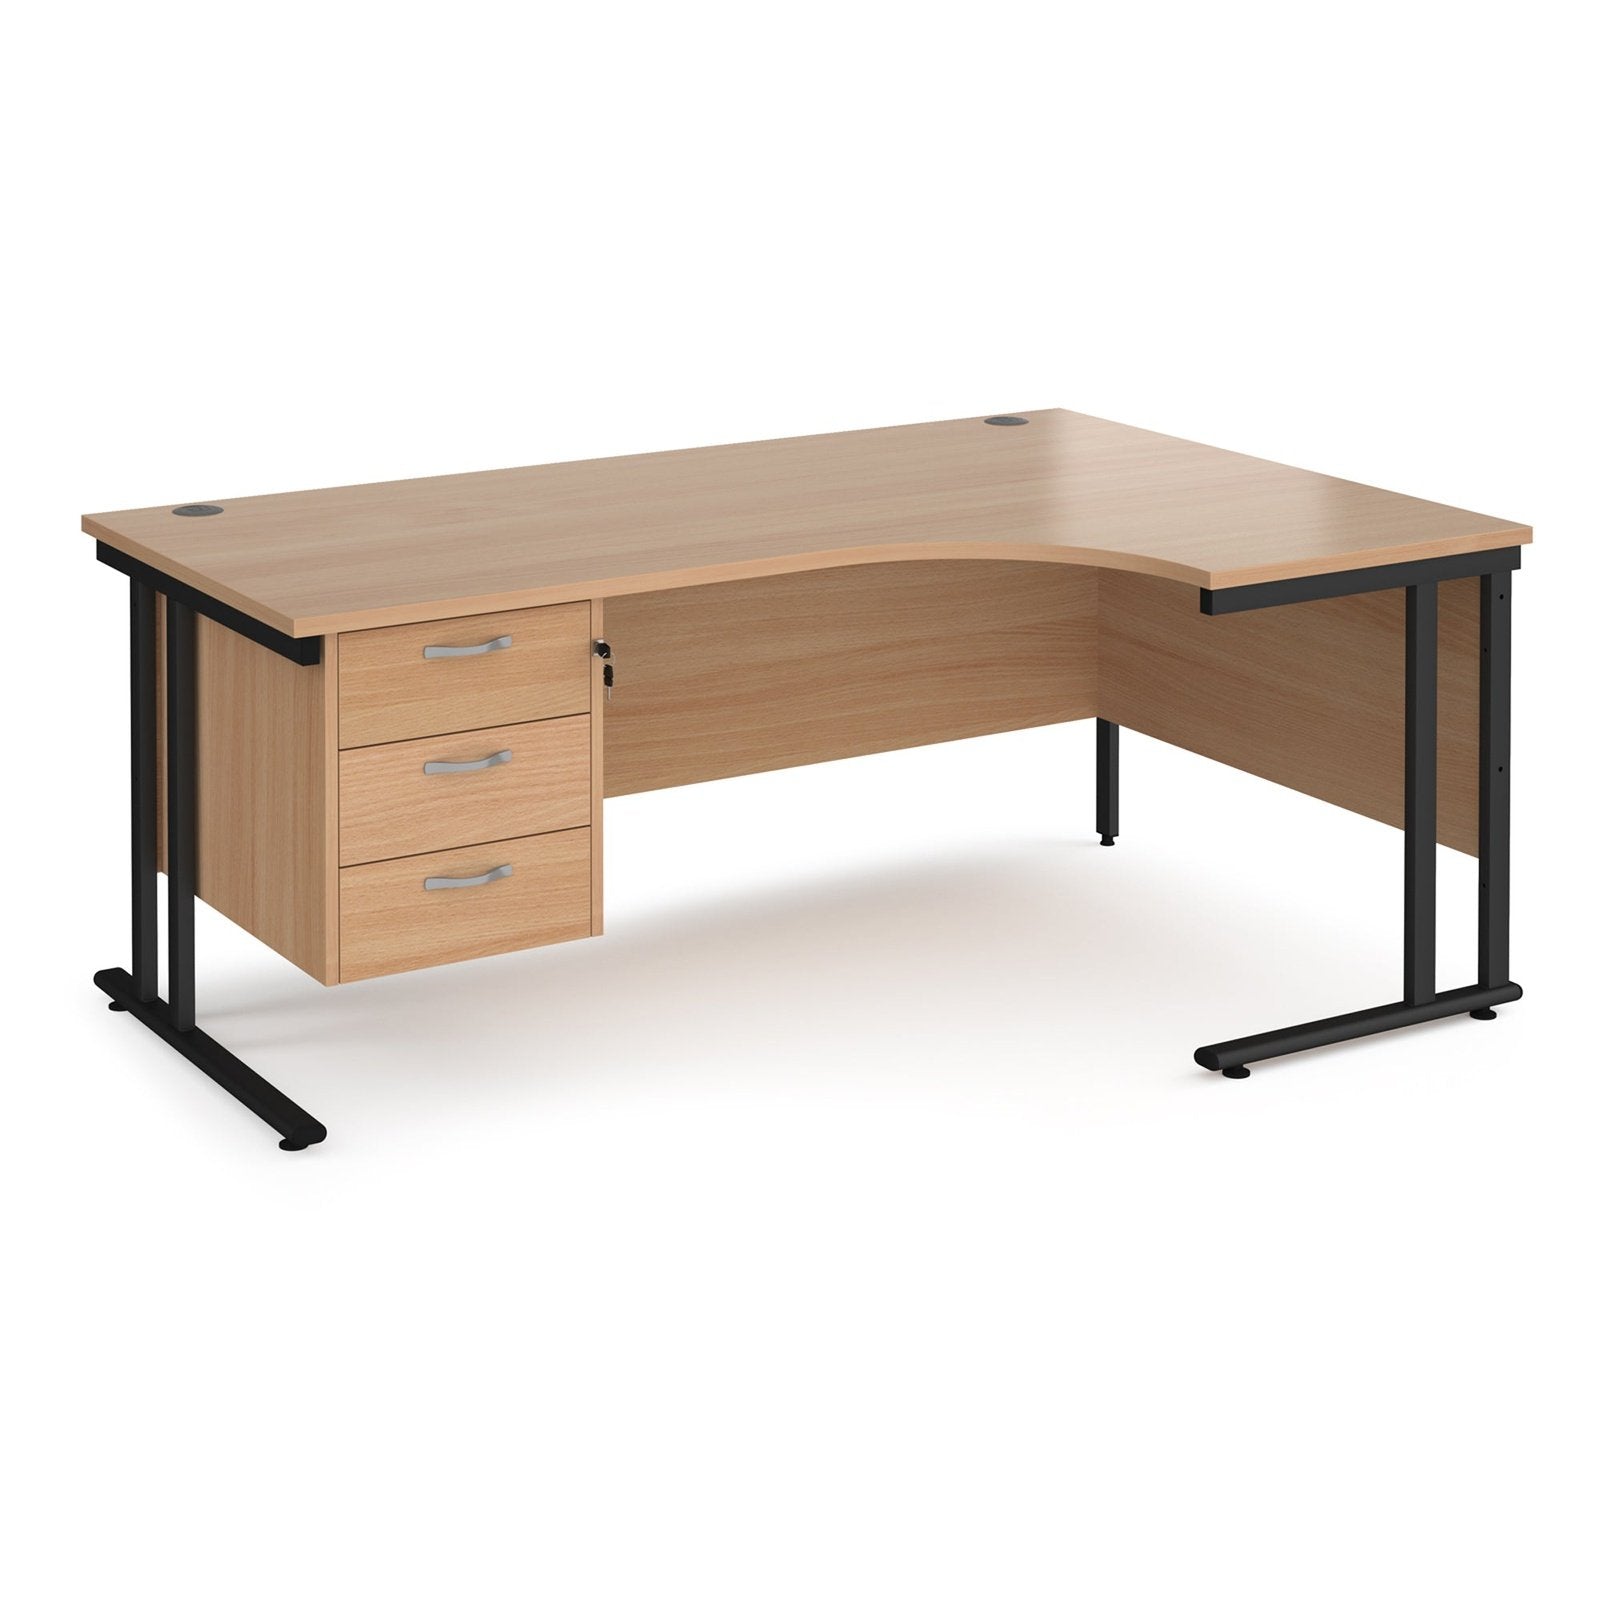 Maestro 25 cantilever leg right hand ergonomic desk with 3 drawer pedestal - Office Products Online